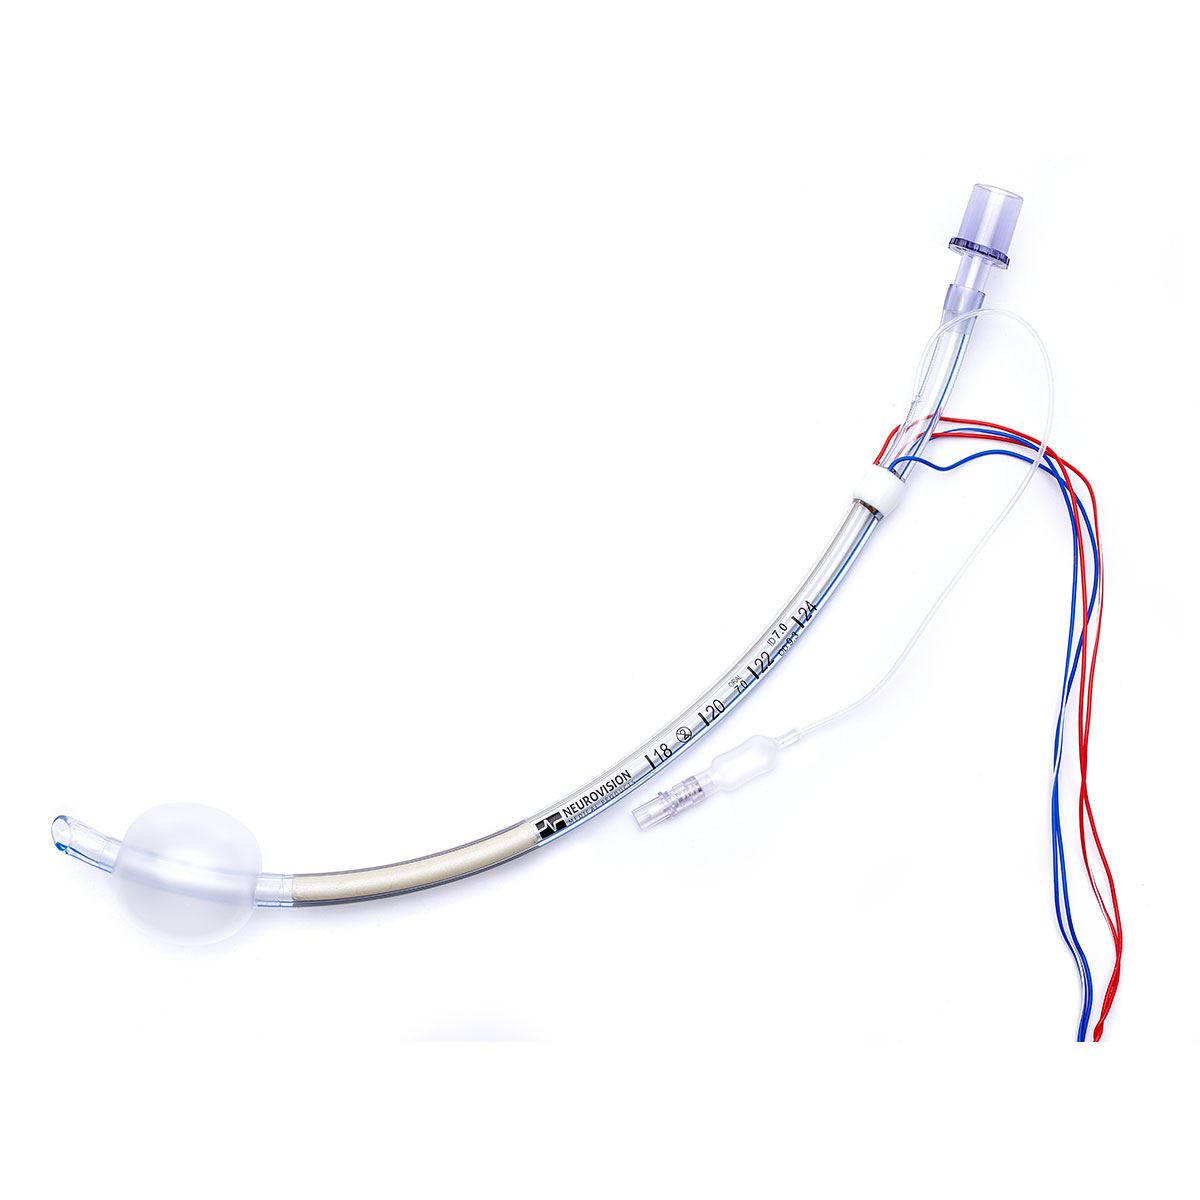 Cobra EMG Tube - Universal Recurrent Laryngeal Nerve Monitoring - Size 7 mm - Intraoperative Neuromonitoring Products